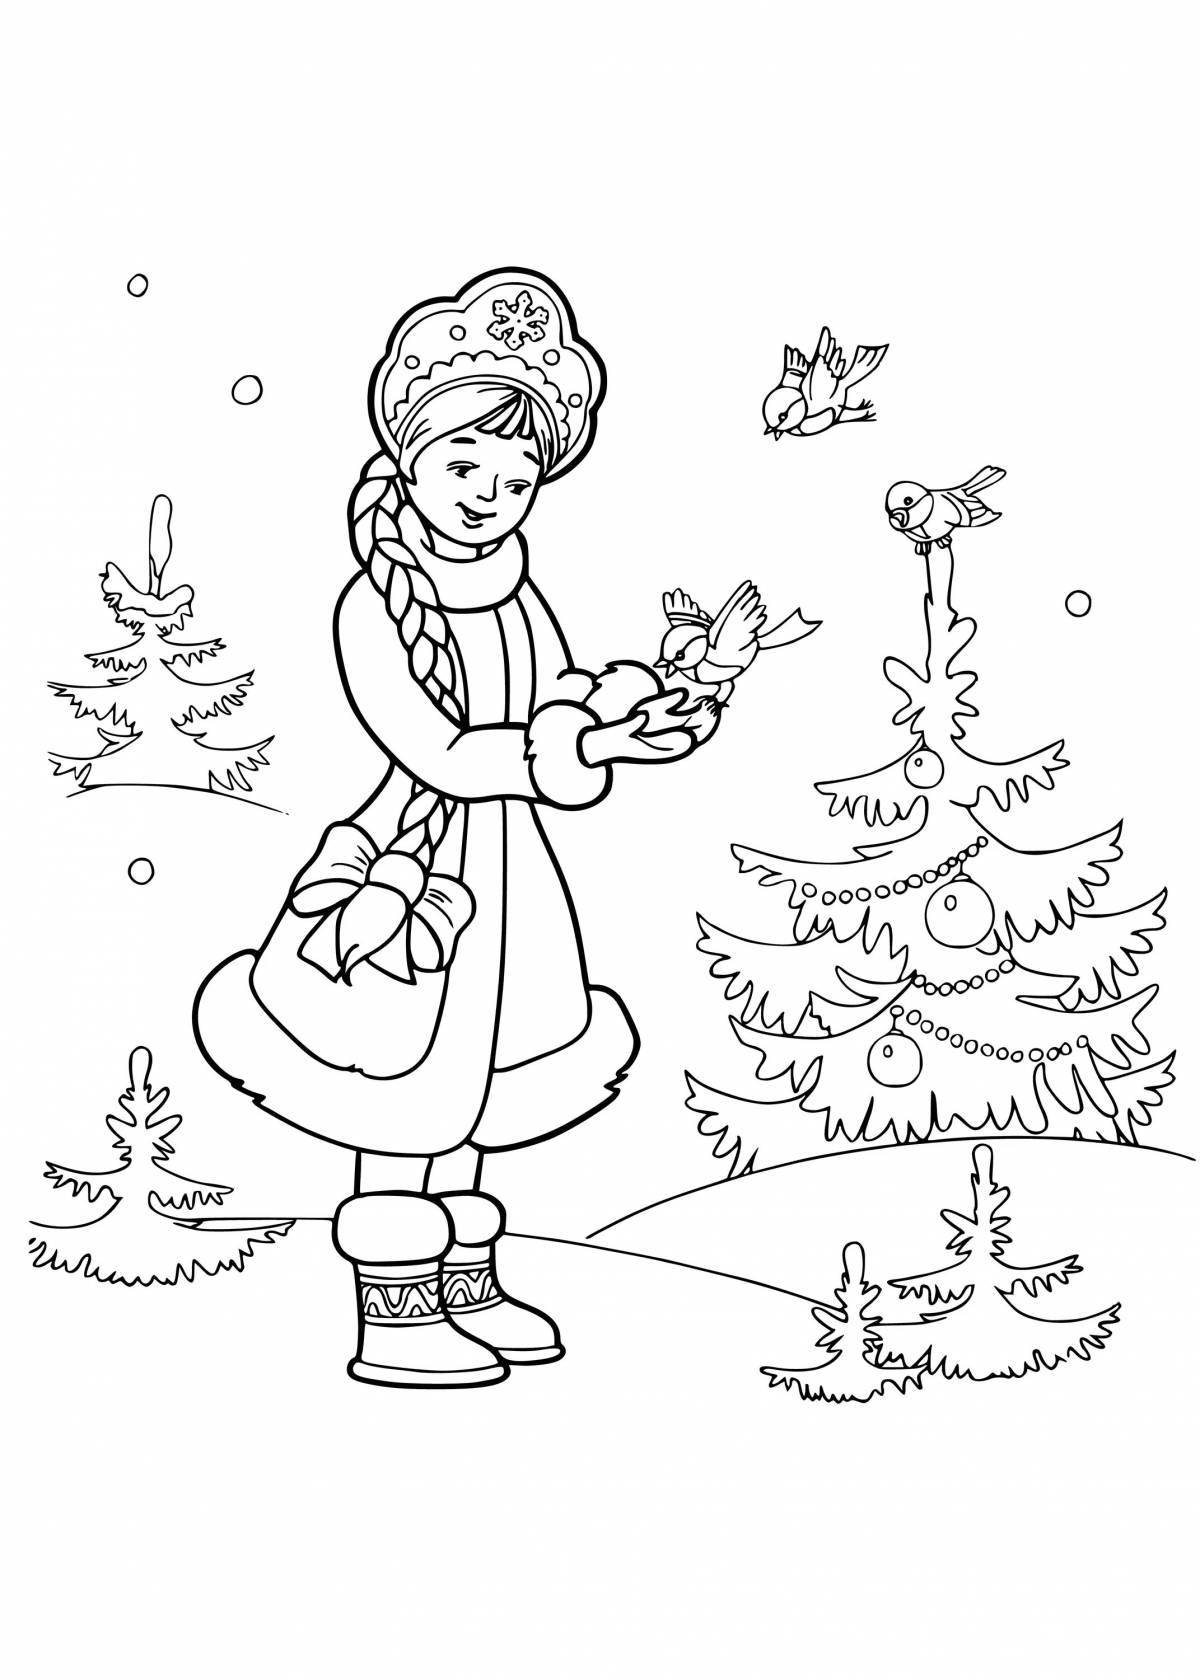 Dazzling coloring drawing of a snow maiden